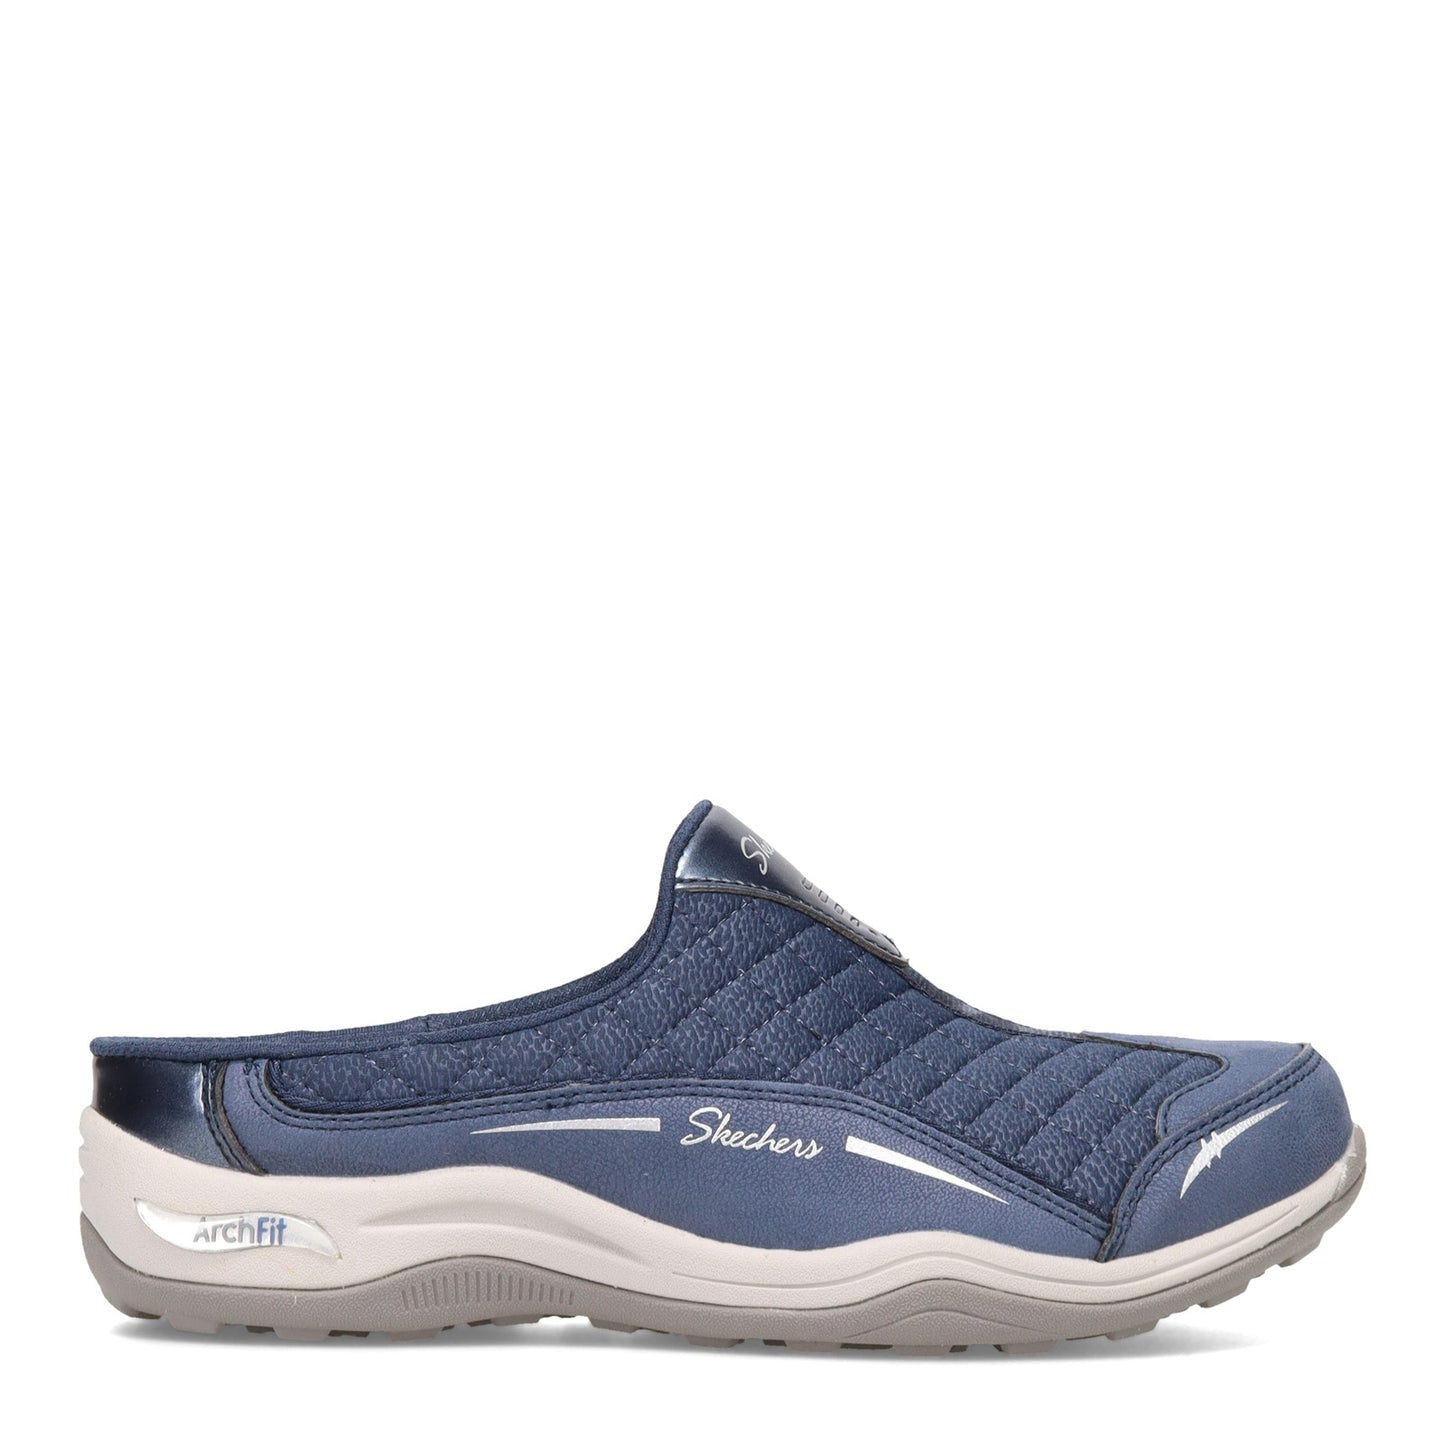 Peltz Shoes  Women's Skechers Relaxed Fit: Arch Fit - Commute Clog Navy 100322-NVY